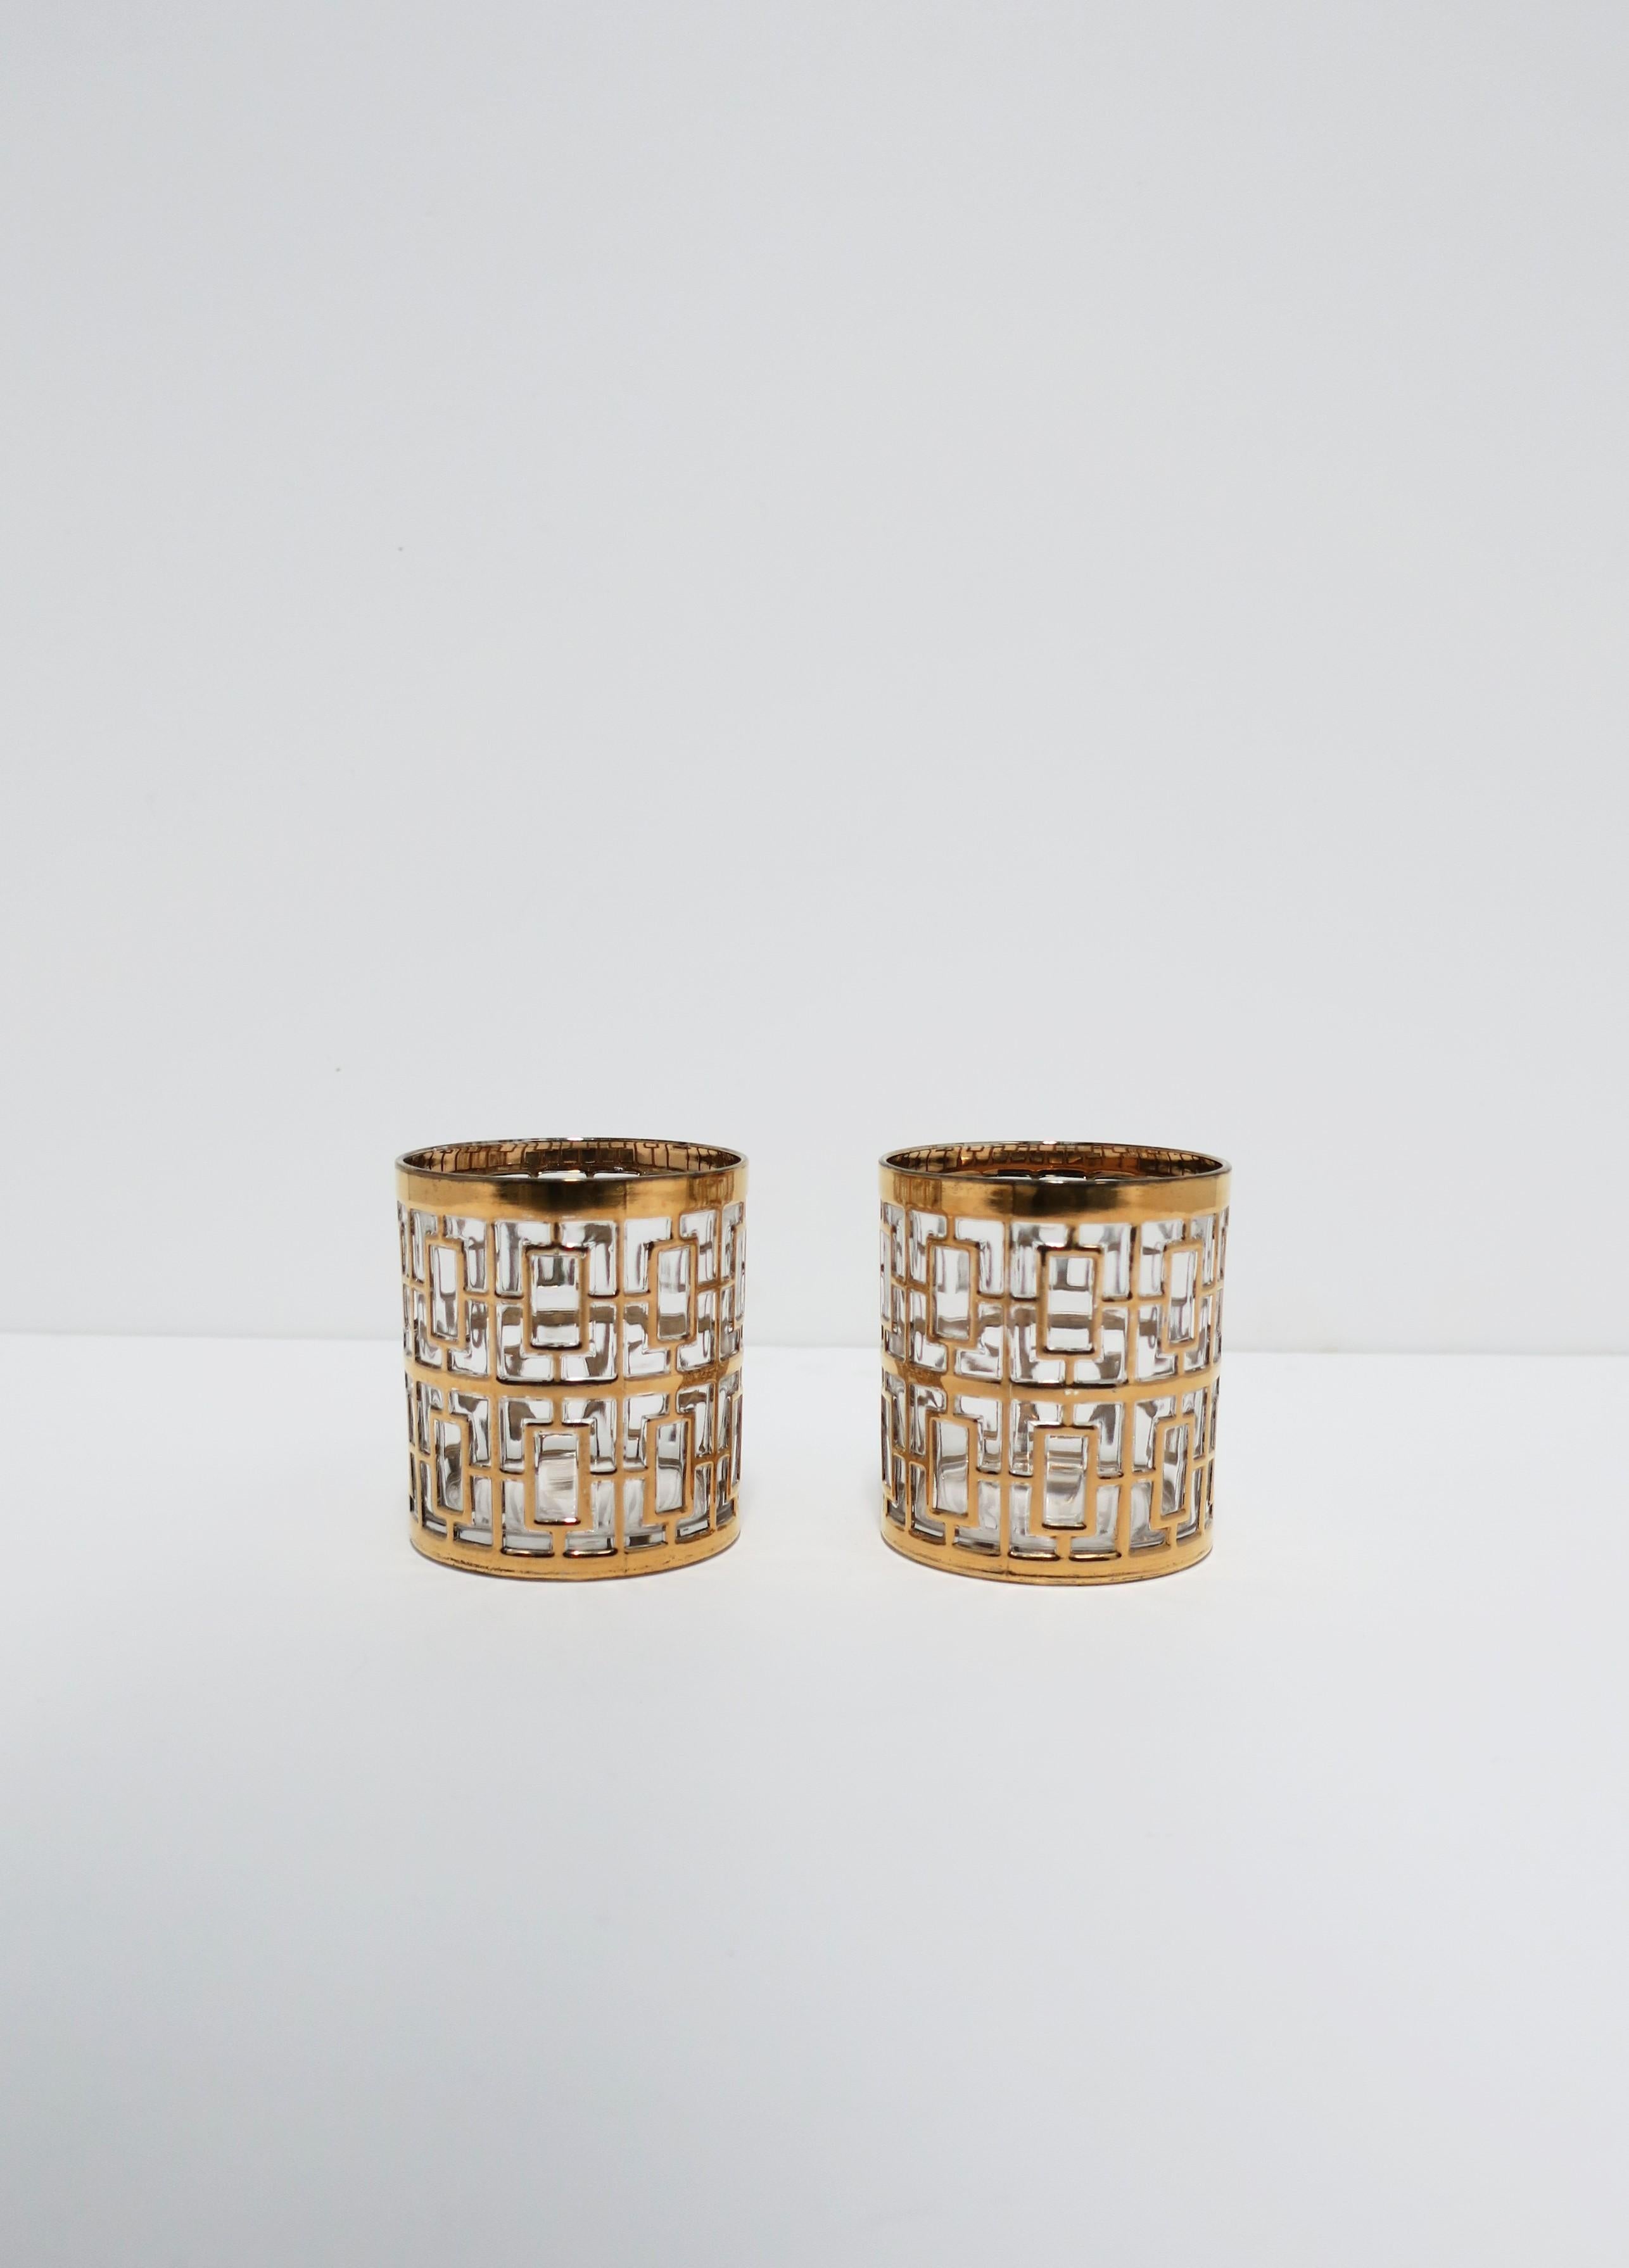 A beautiful vintage set of two (2) cocktail rock's glasses in the Hollywood Regency style by Imperial Glass Co., circa 1960s, USA. Glasses have a 22-karat gold-plate overlay on clear glass in the 'Shoji' screen pattern, which was signature to the